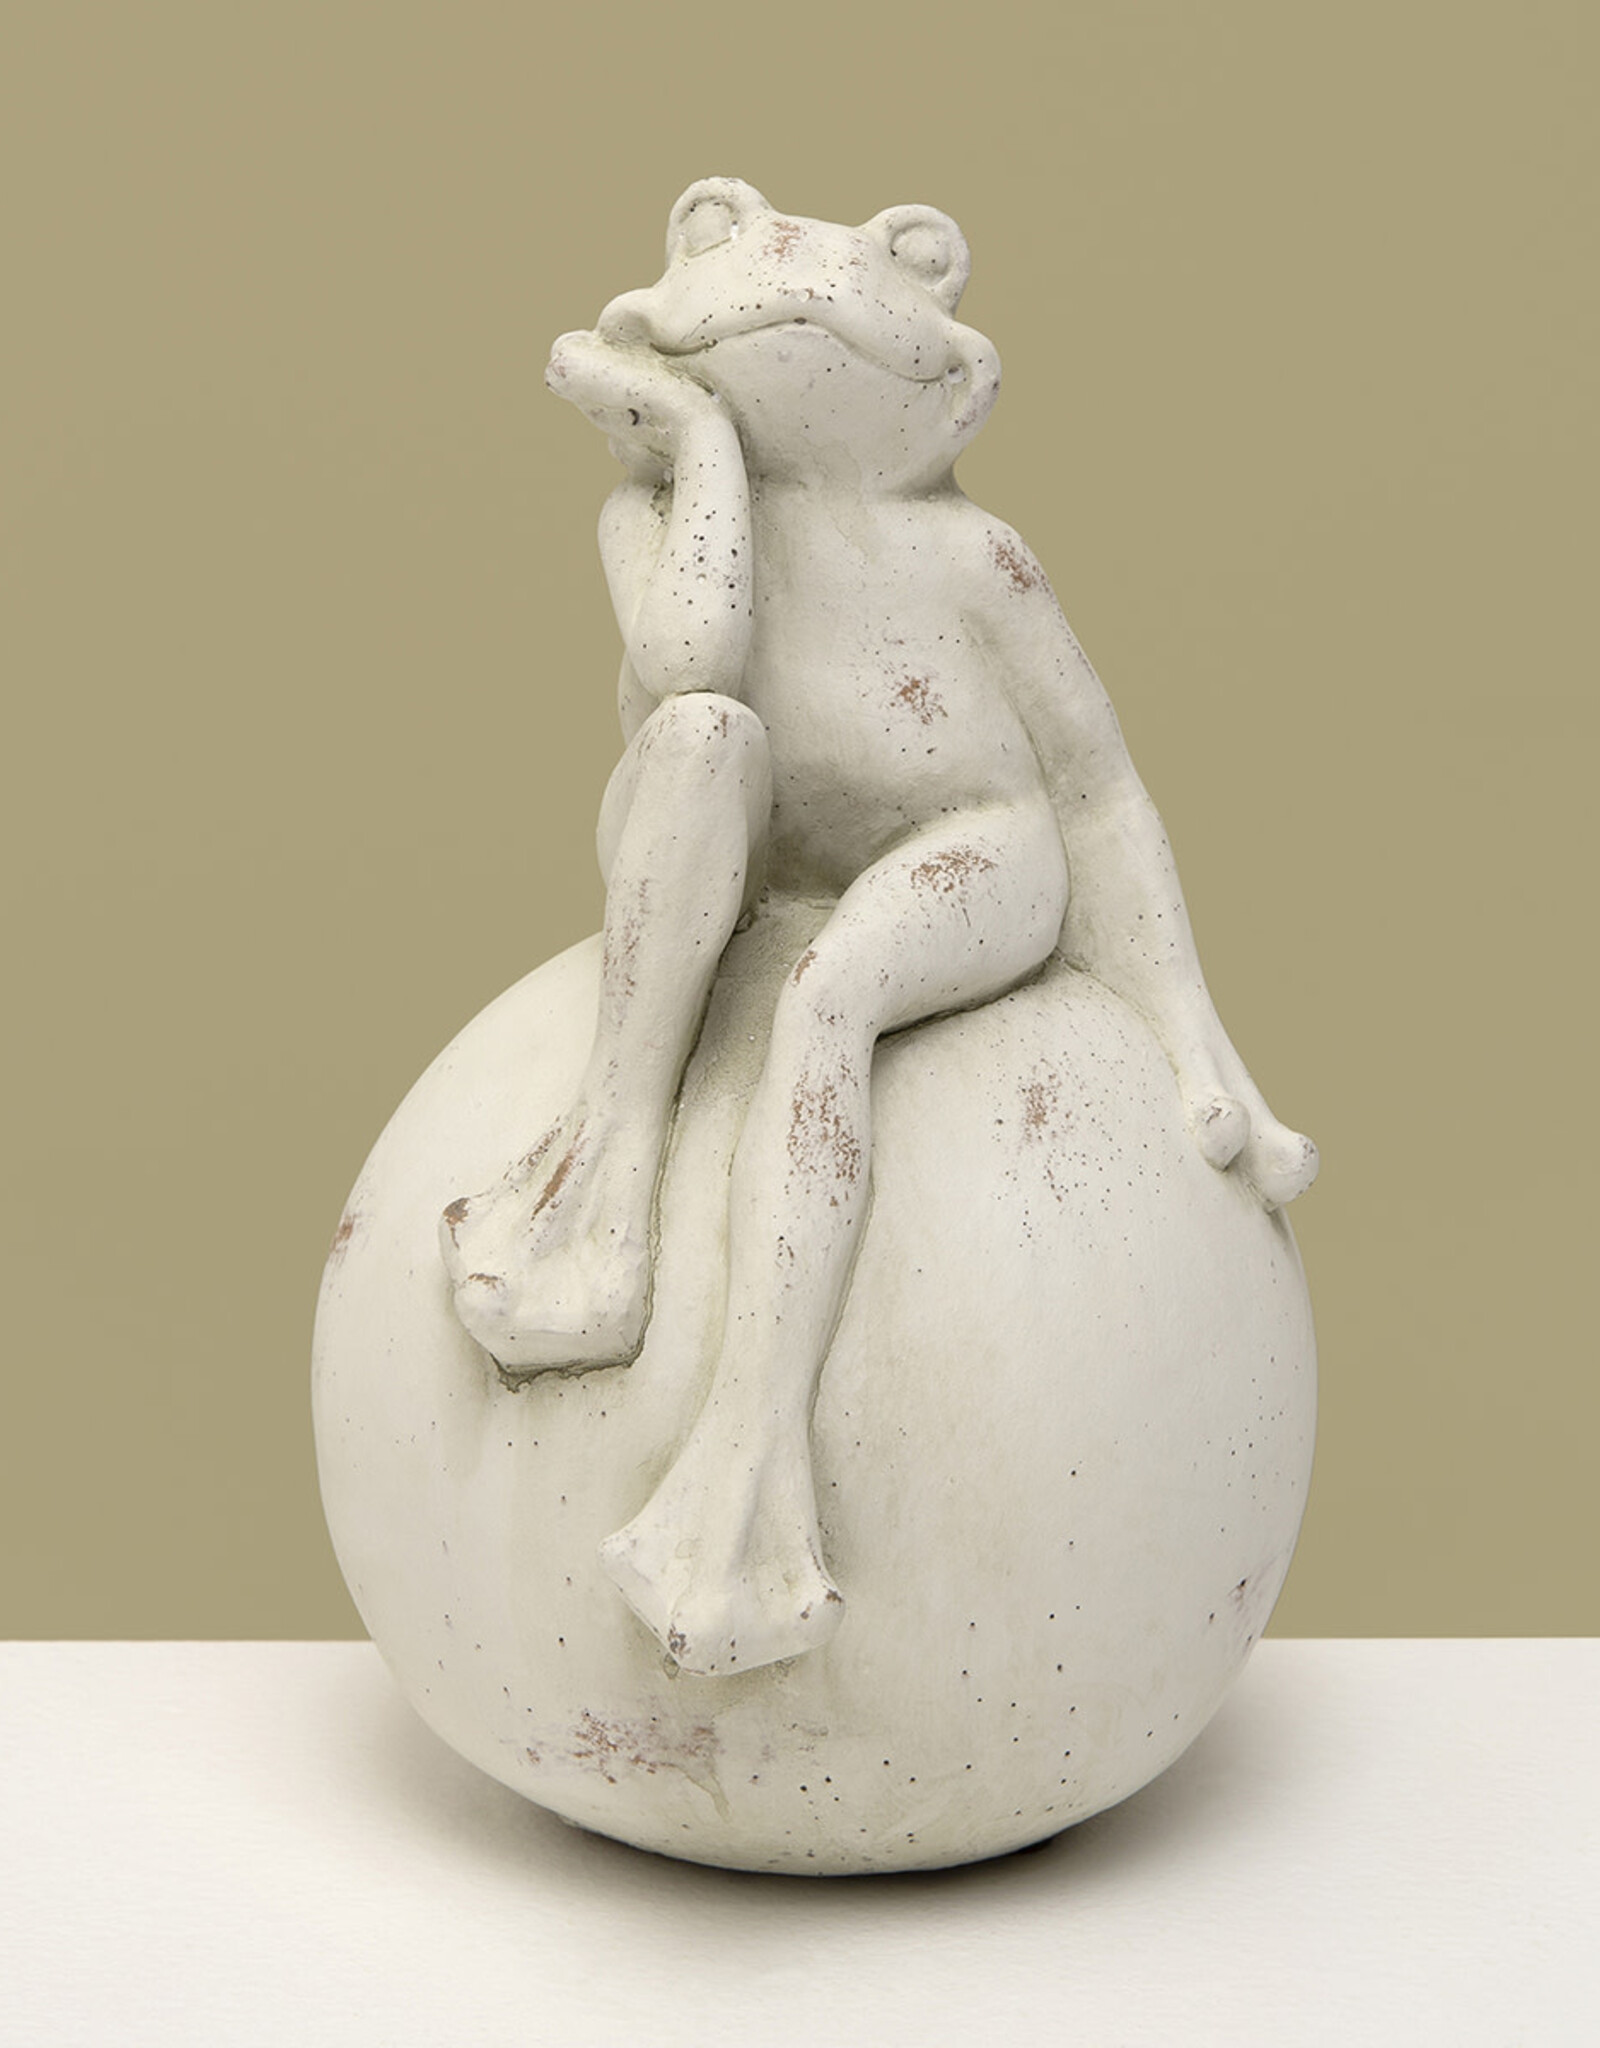 Meravic 7.5" Frog Thinking on Ball Concrete